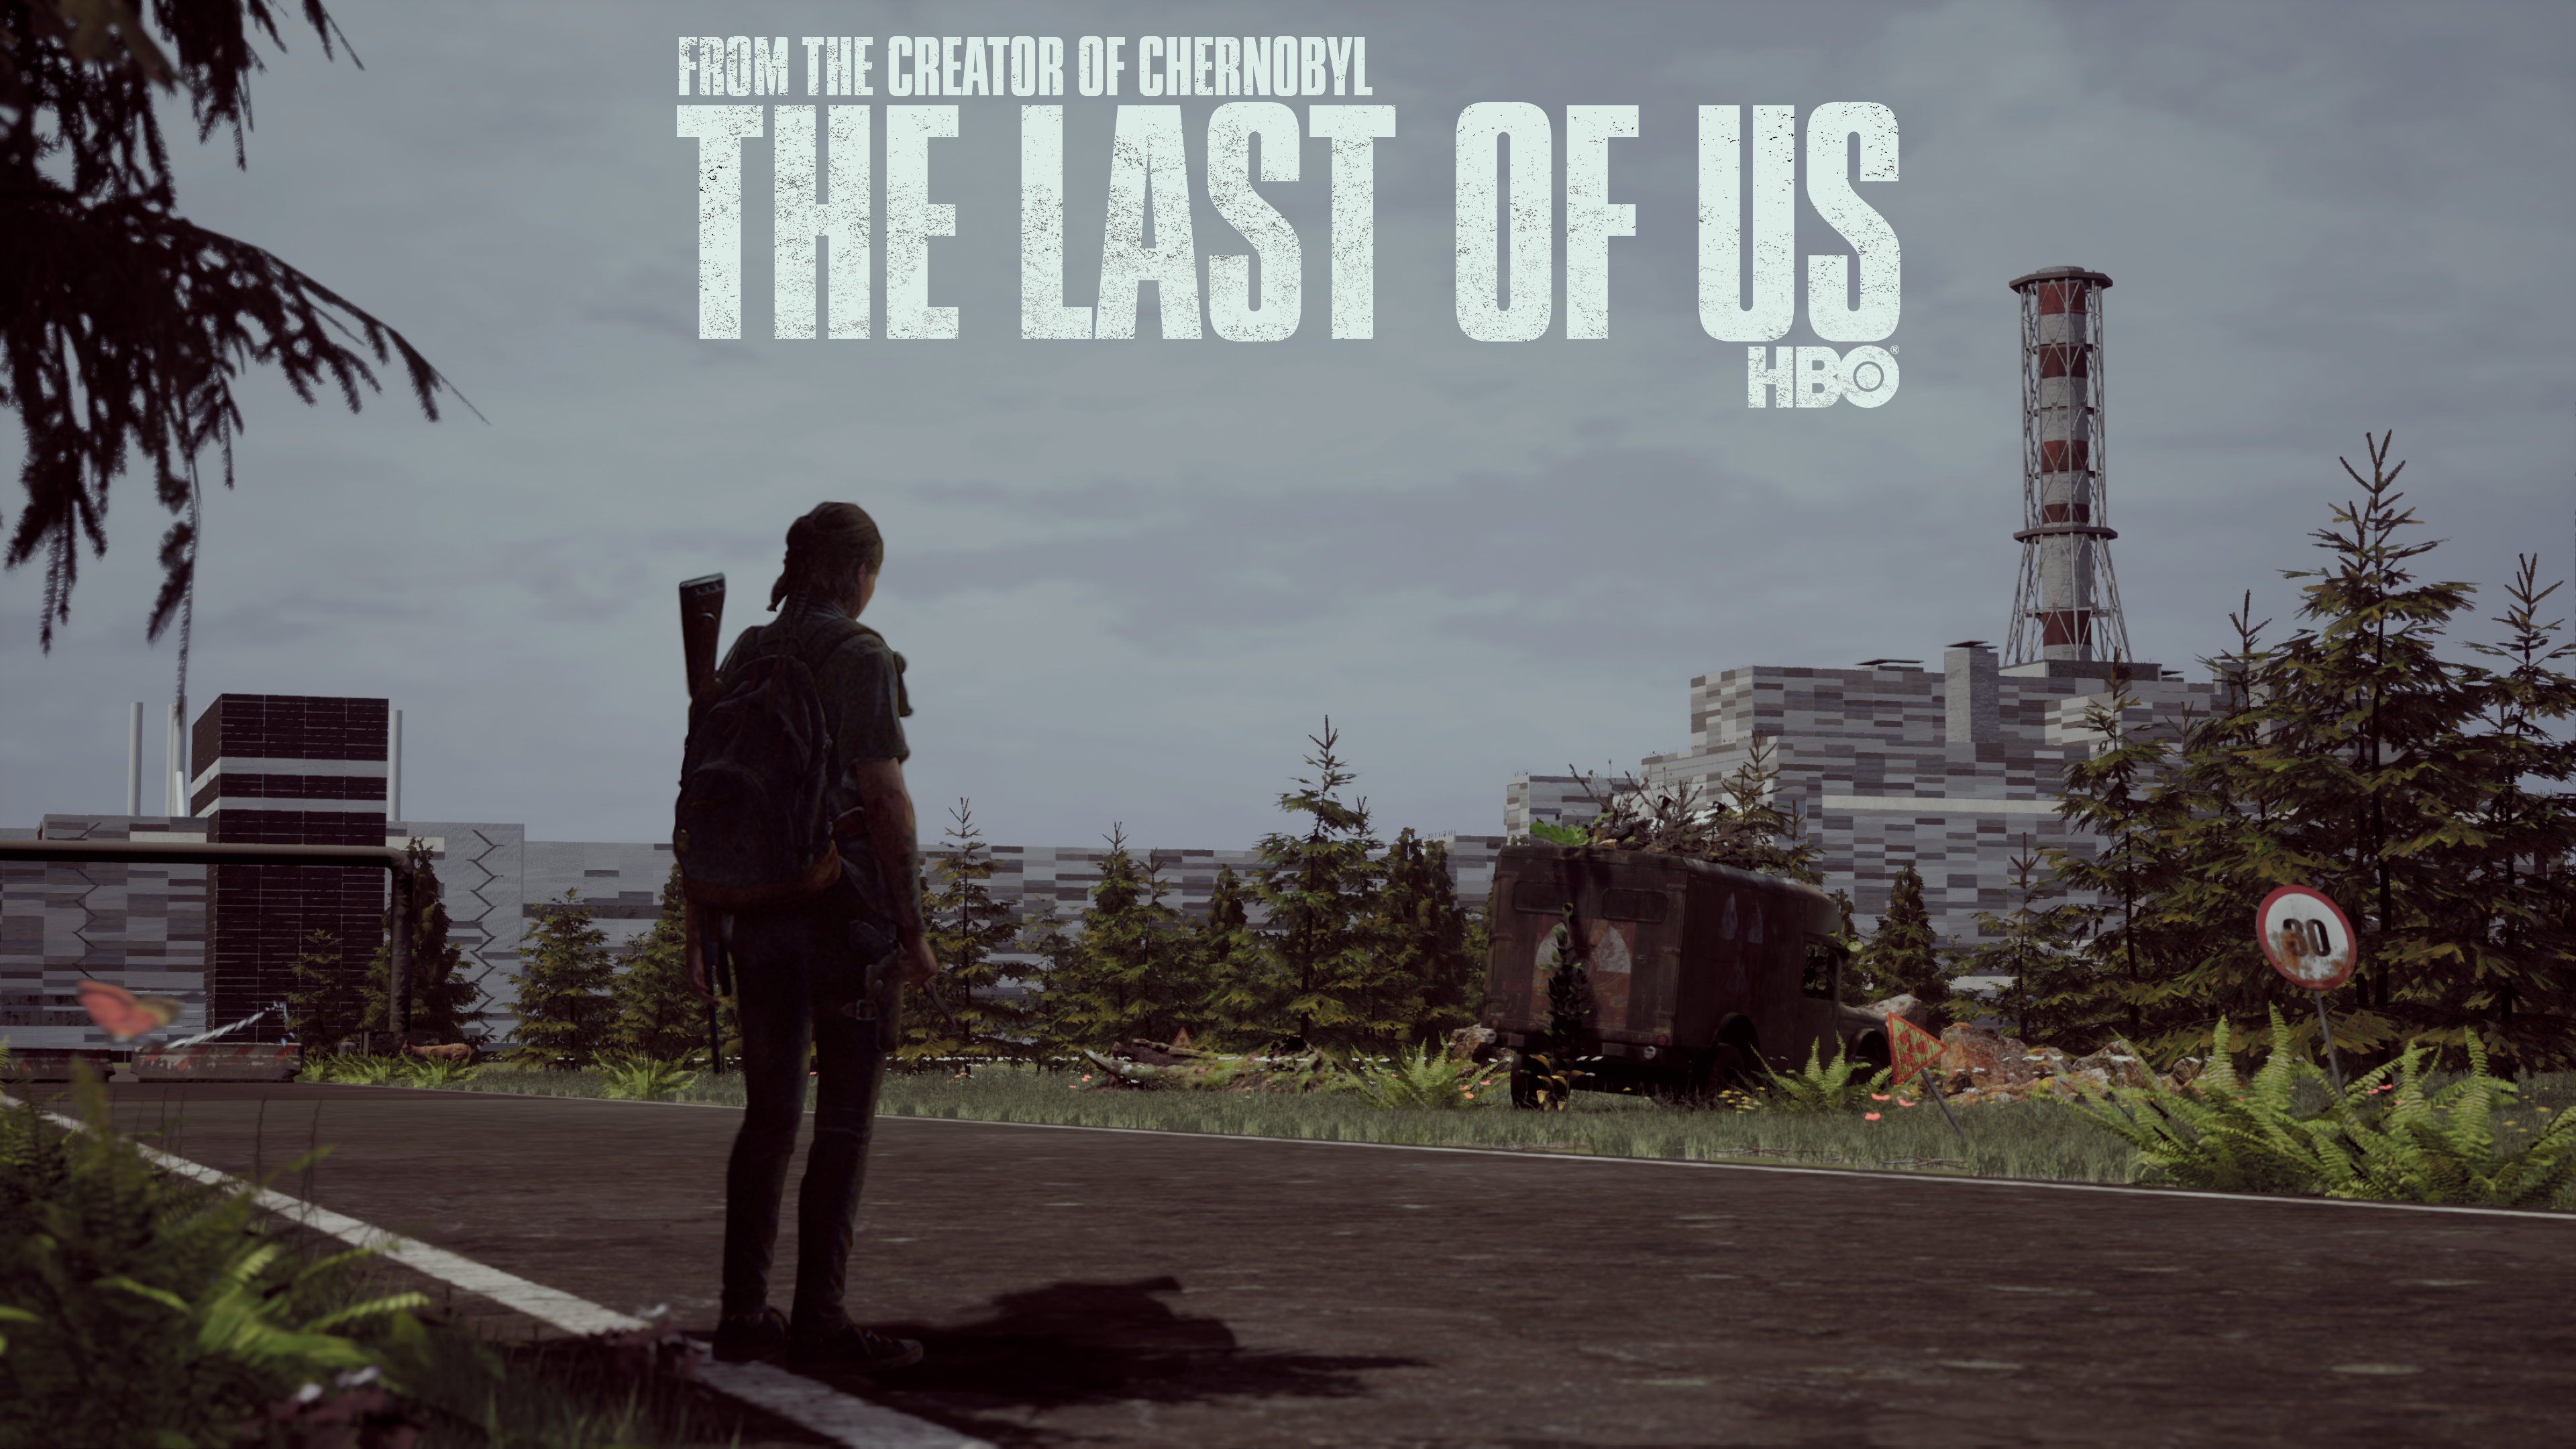 The Last of I made these The Last of Us HBO intro 4k & widescreen wallpapers  Us (TLOU) HBO Intro wallpapers : r/ThelastofusHBOseries